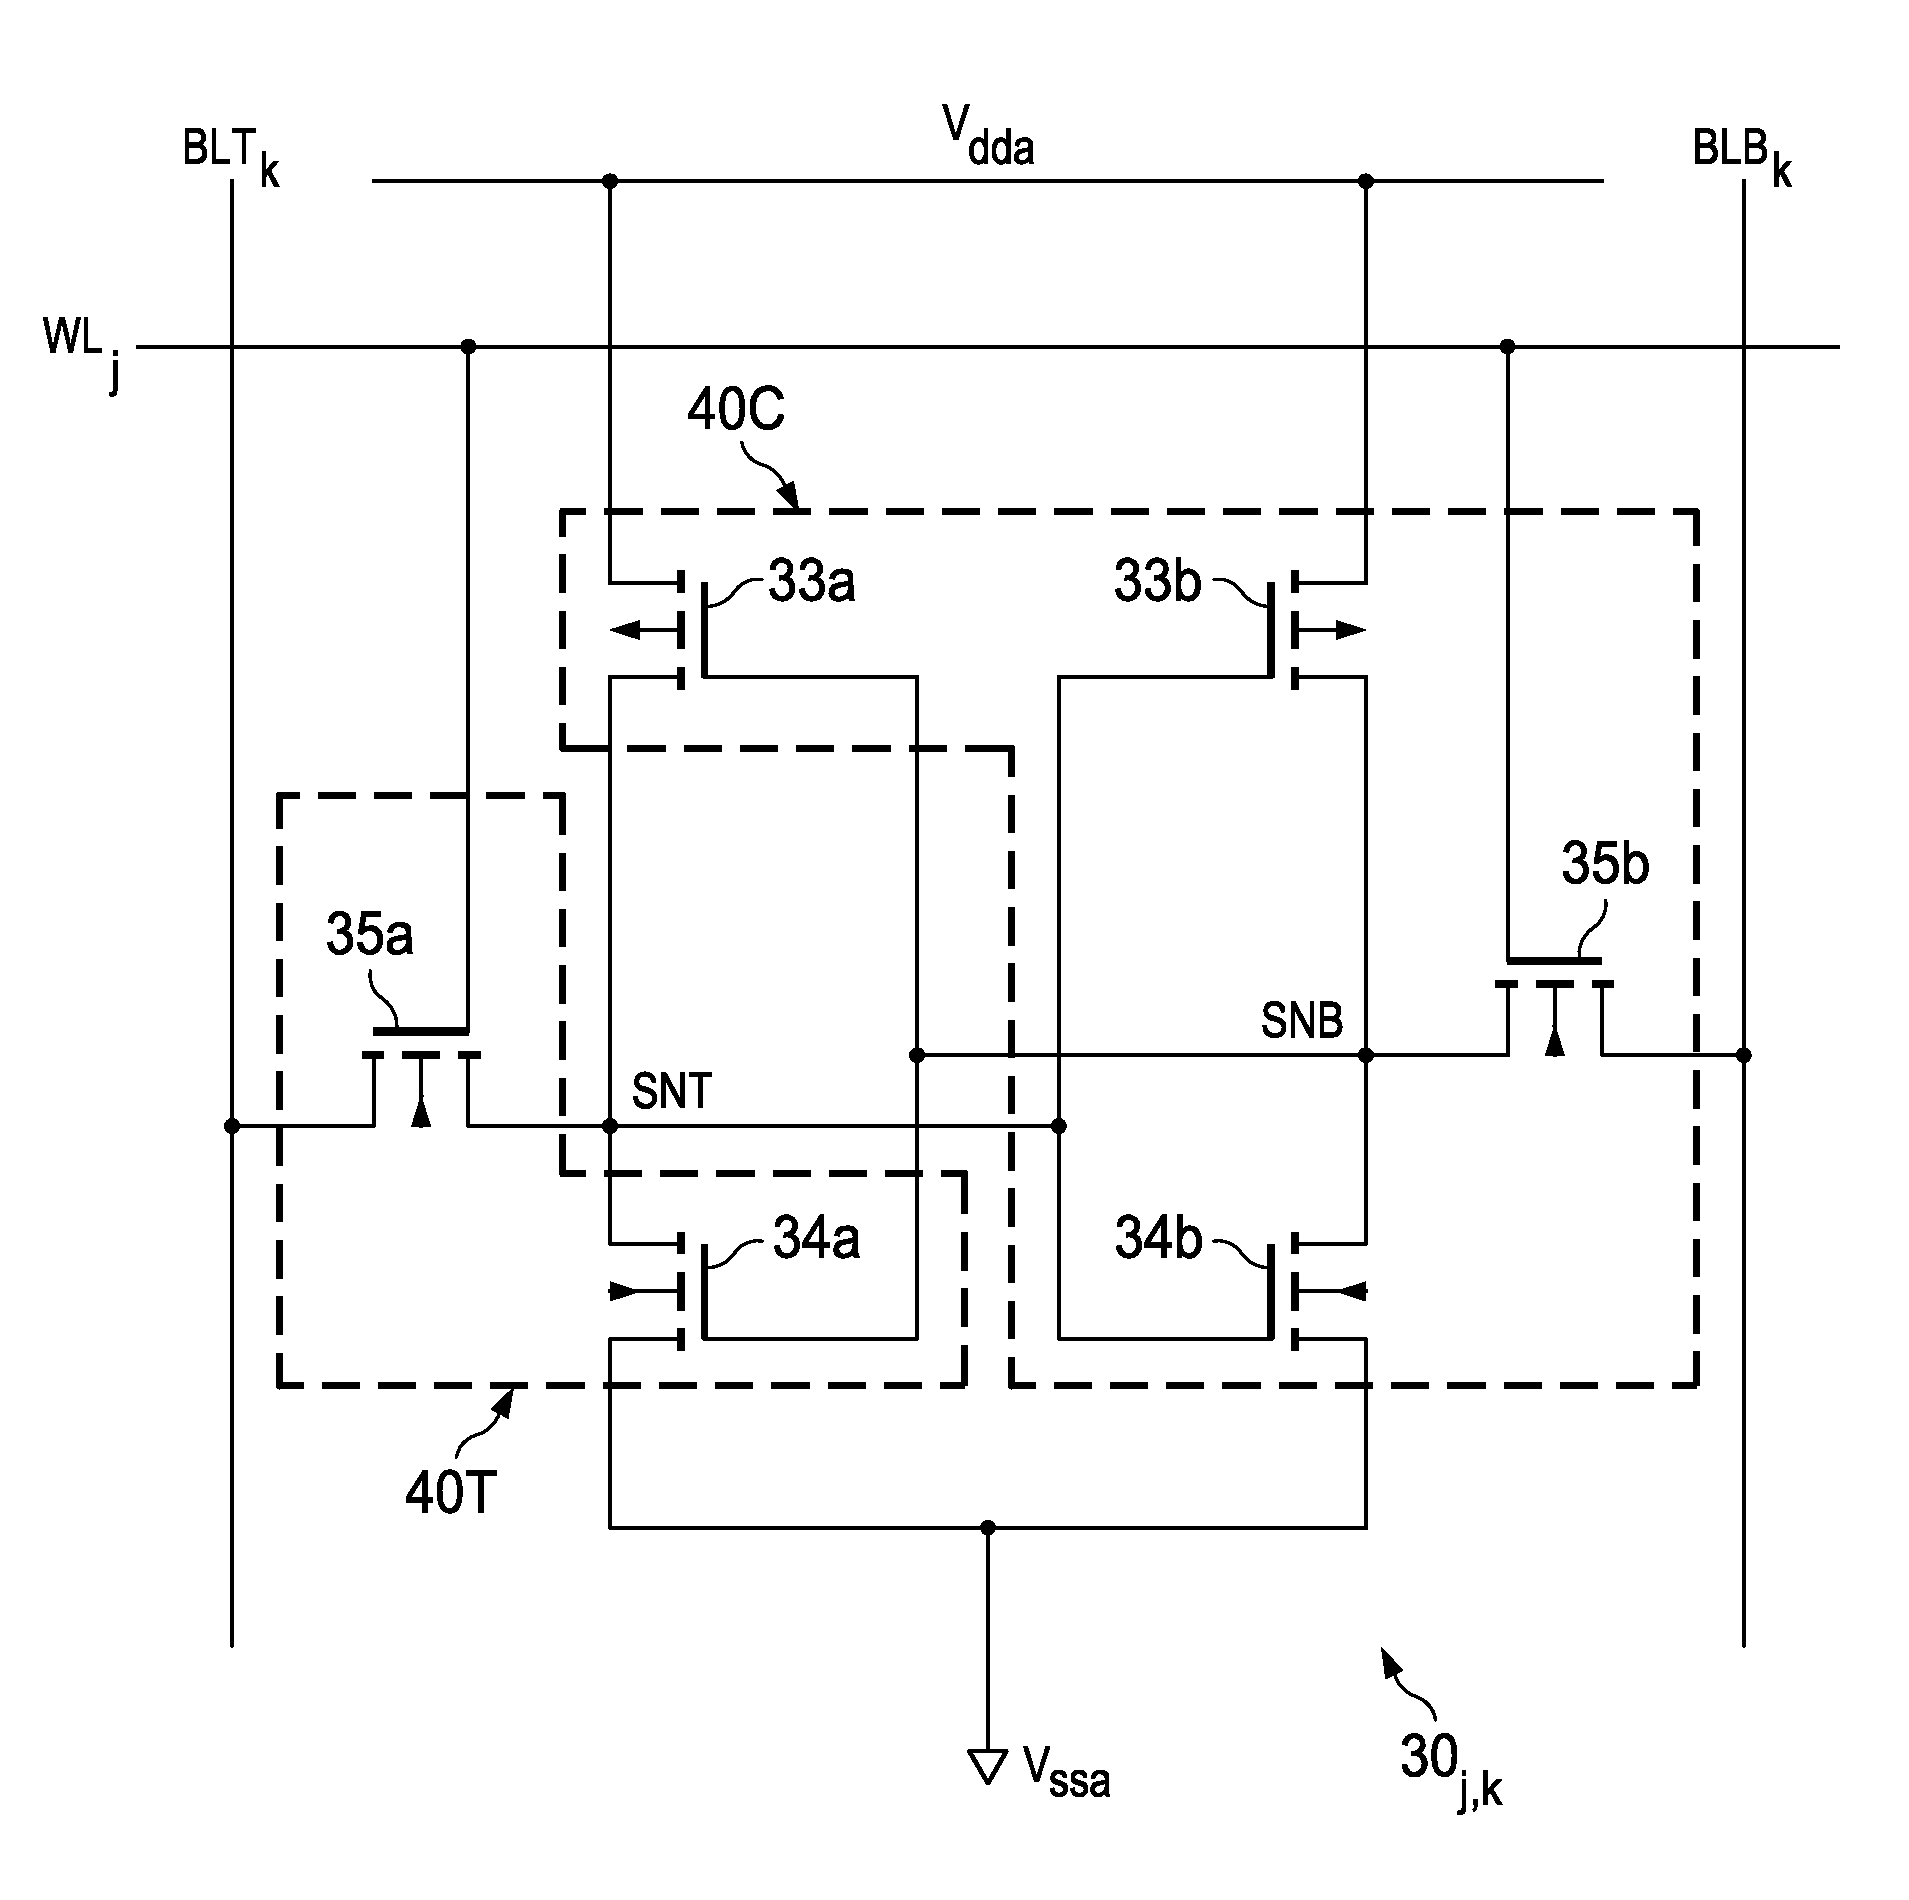 Asymmetric static random access memory cell with dual stress liner